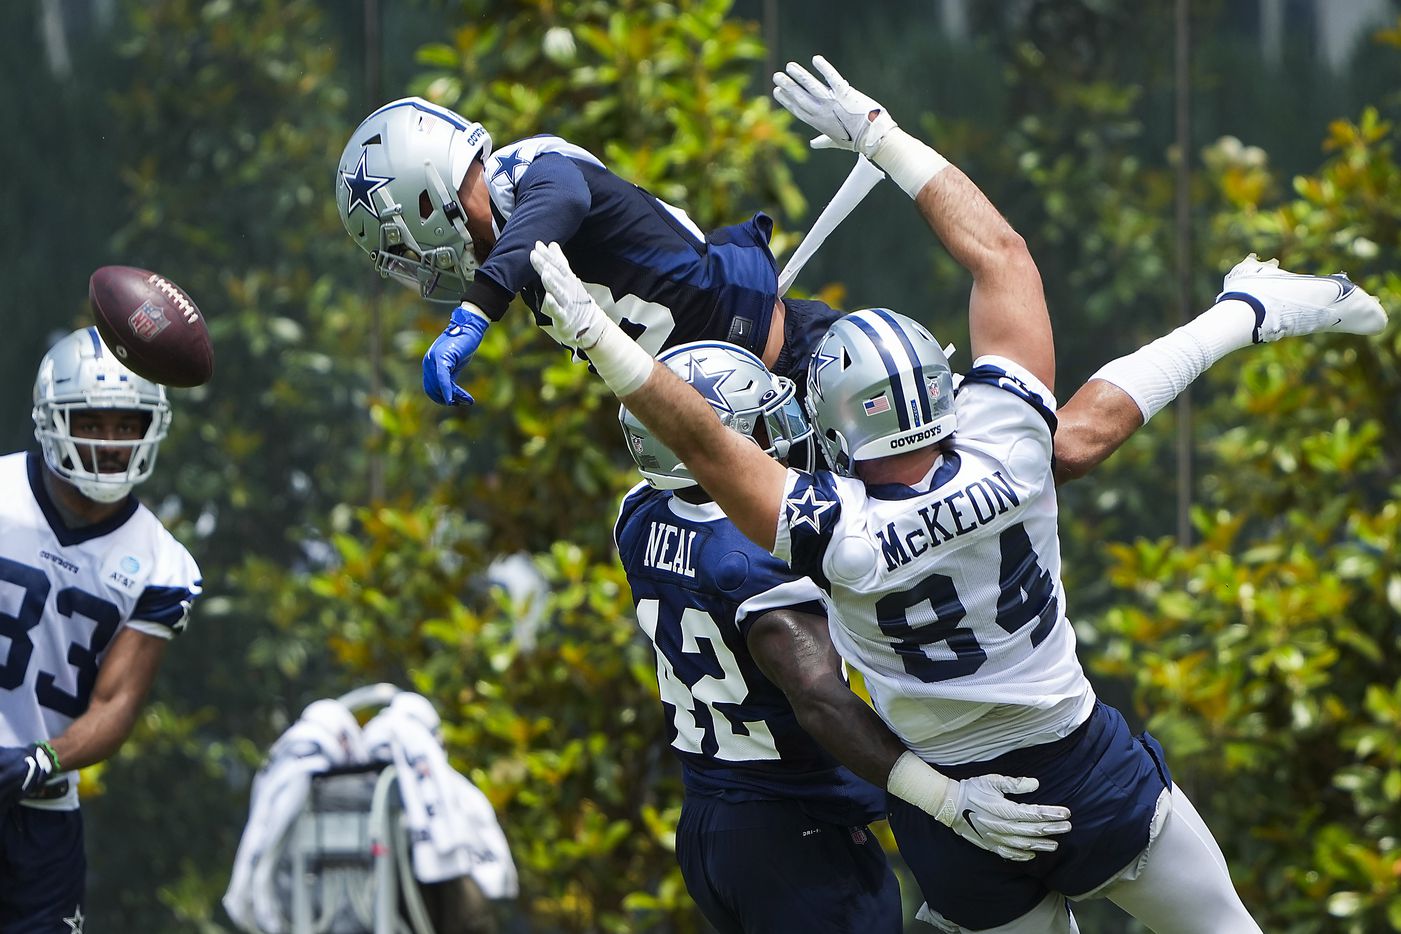 Dallas Cowboys safety Darian Thompson (23) leaps over tight end Sean McKeon (84), linebacker Keanu Neal (42) and wide receiver Brennan Eagles (83) to break up a pass during a minicamp practice at The Star on Tuesday, June 8, 2021, in Frisco. (Smiley N. Pool/The Dallas Morning News)